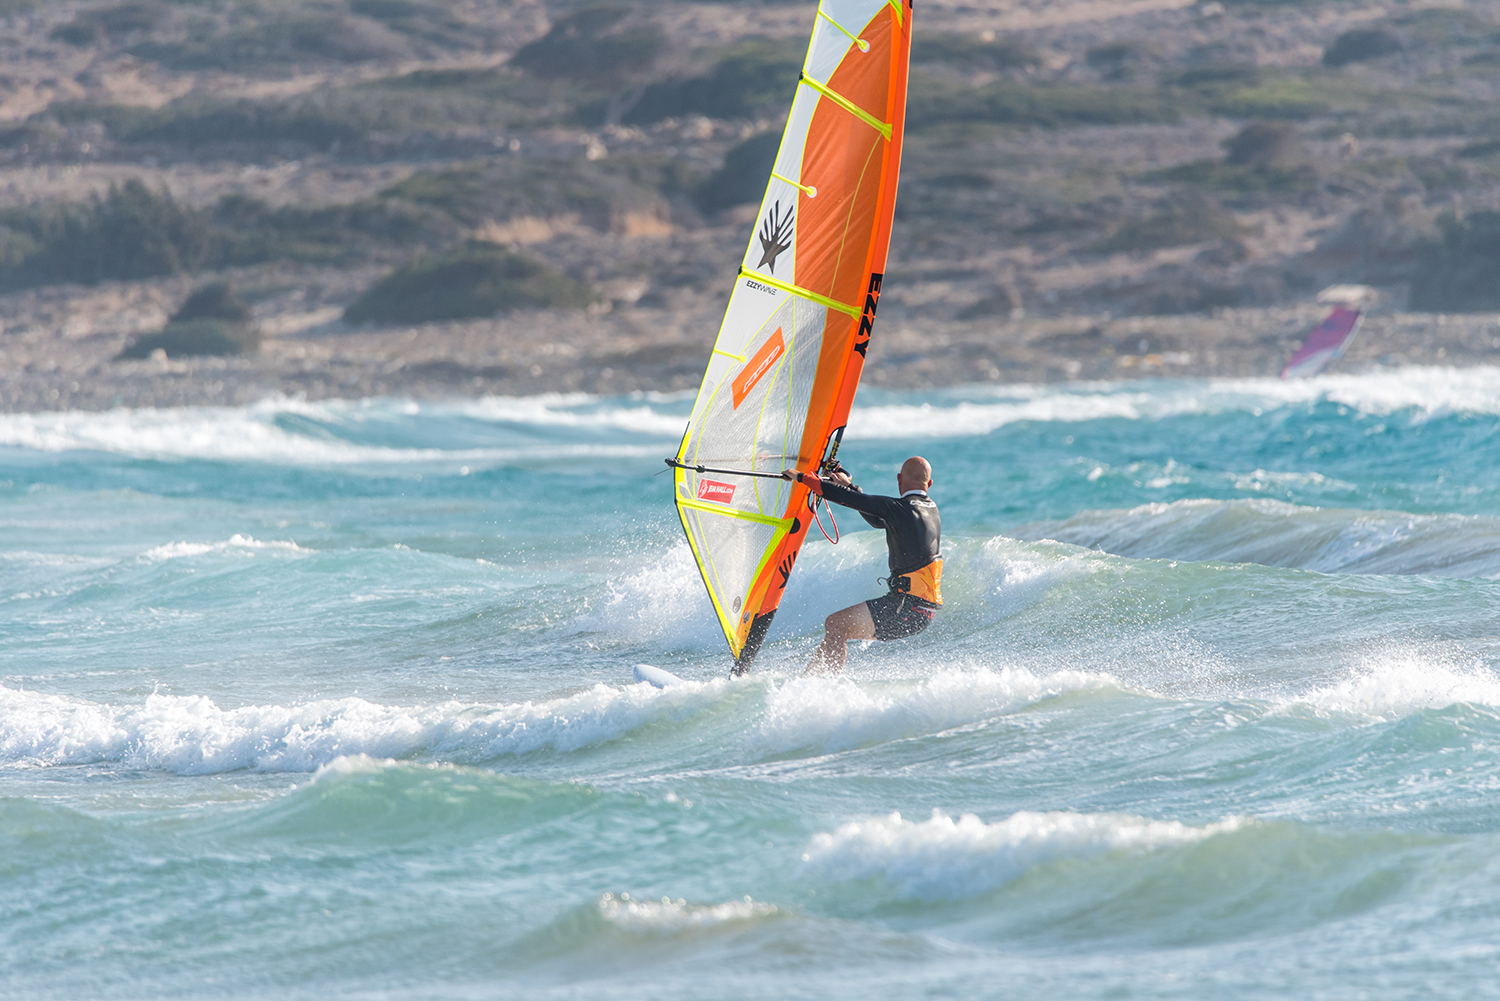 In onshore winds heading downwind prior to take off will get the sail lighter, give you more options and get your board speed up ready to boost more height. Photo by Eye Sea You.